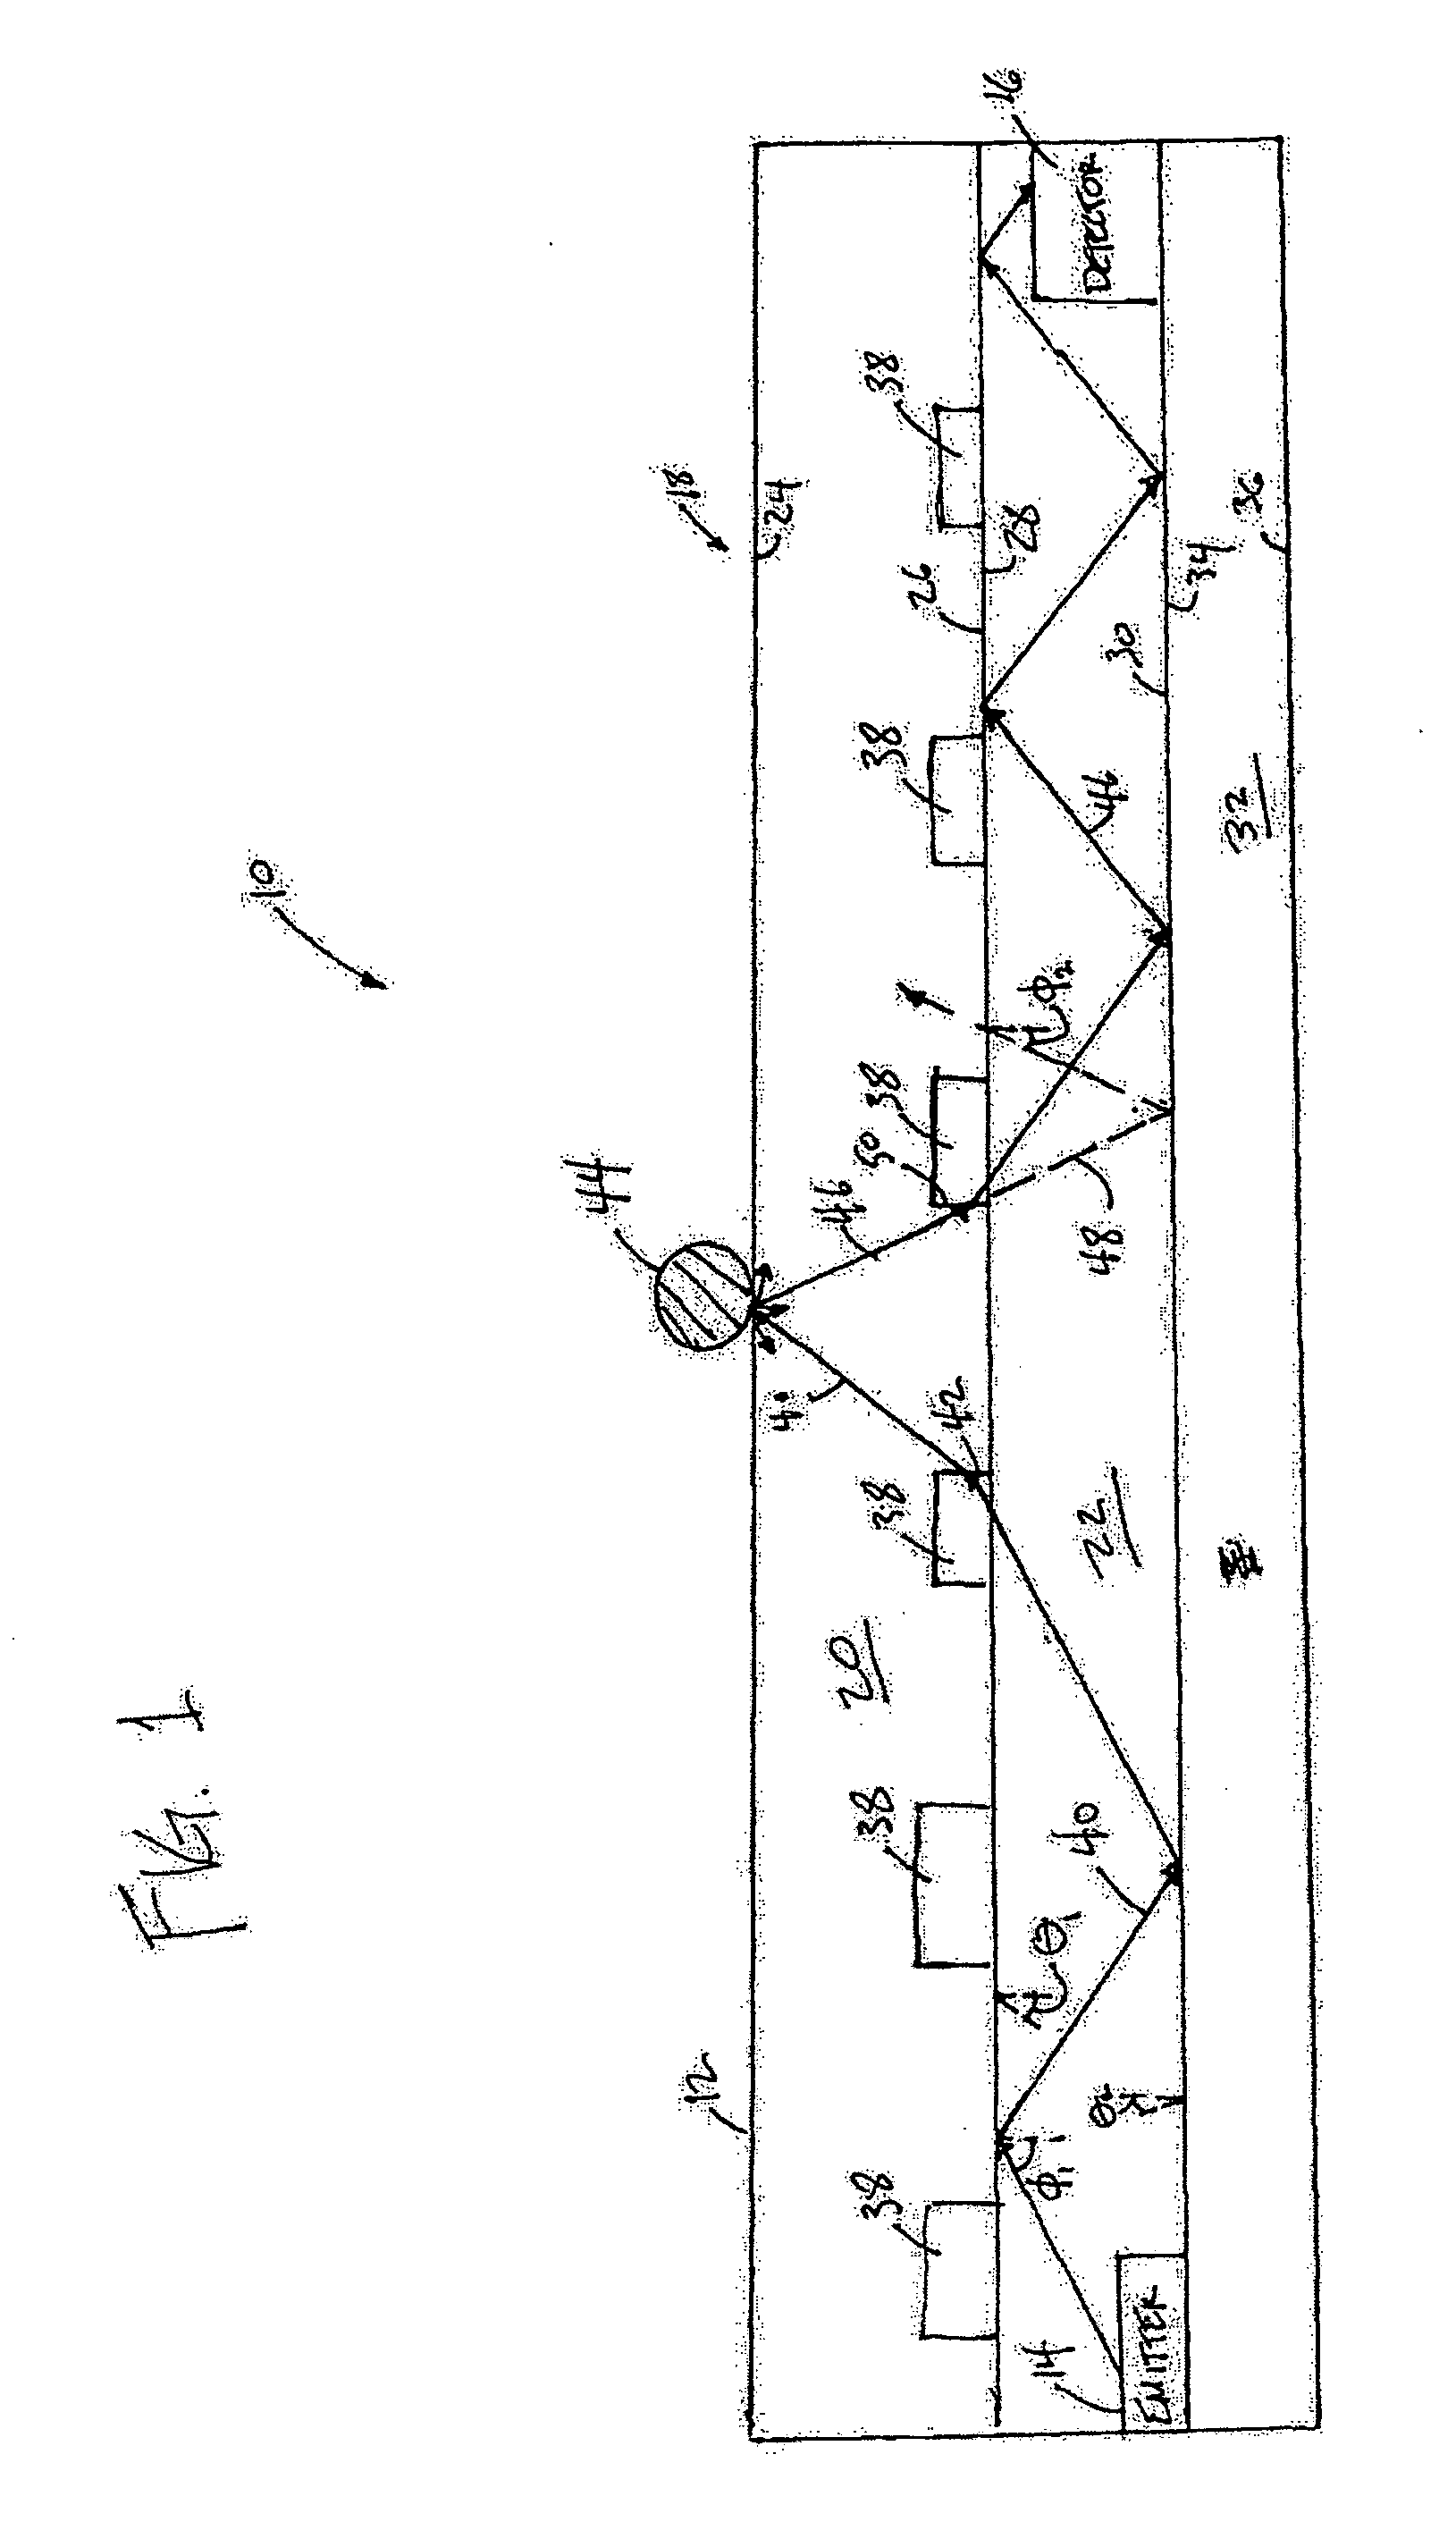 Optical touchpad with three-dimensional position determination